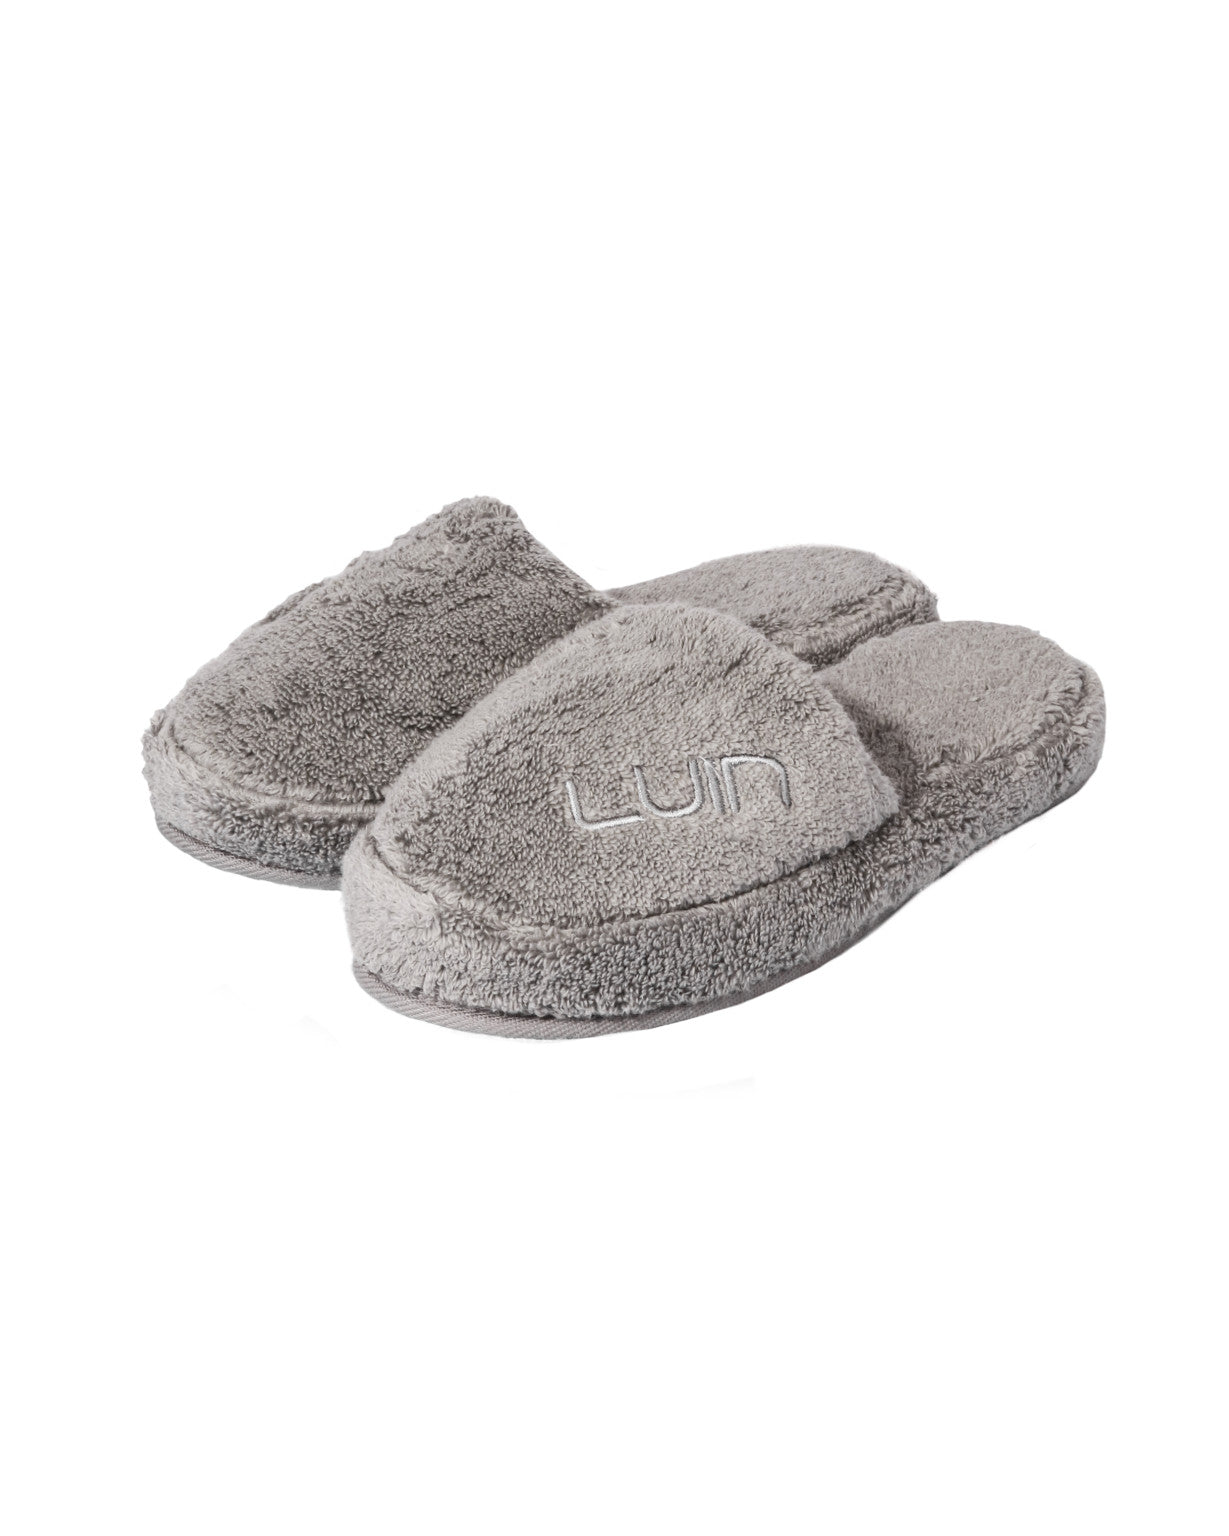 Luin Living Bath Slippers, 6 different colors